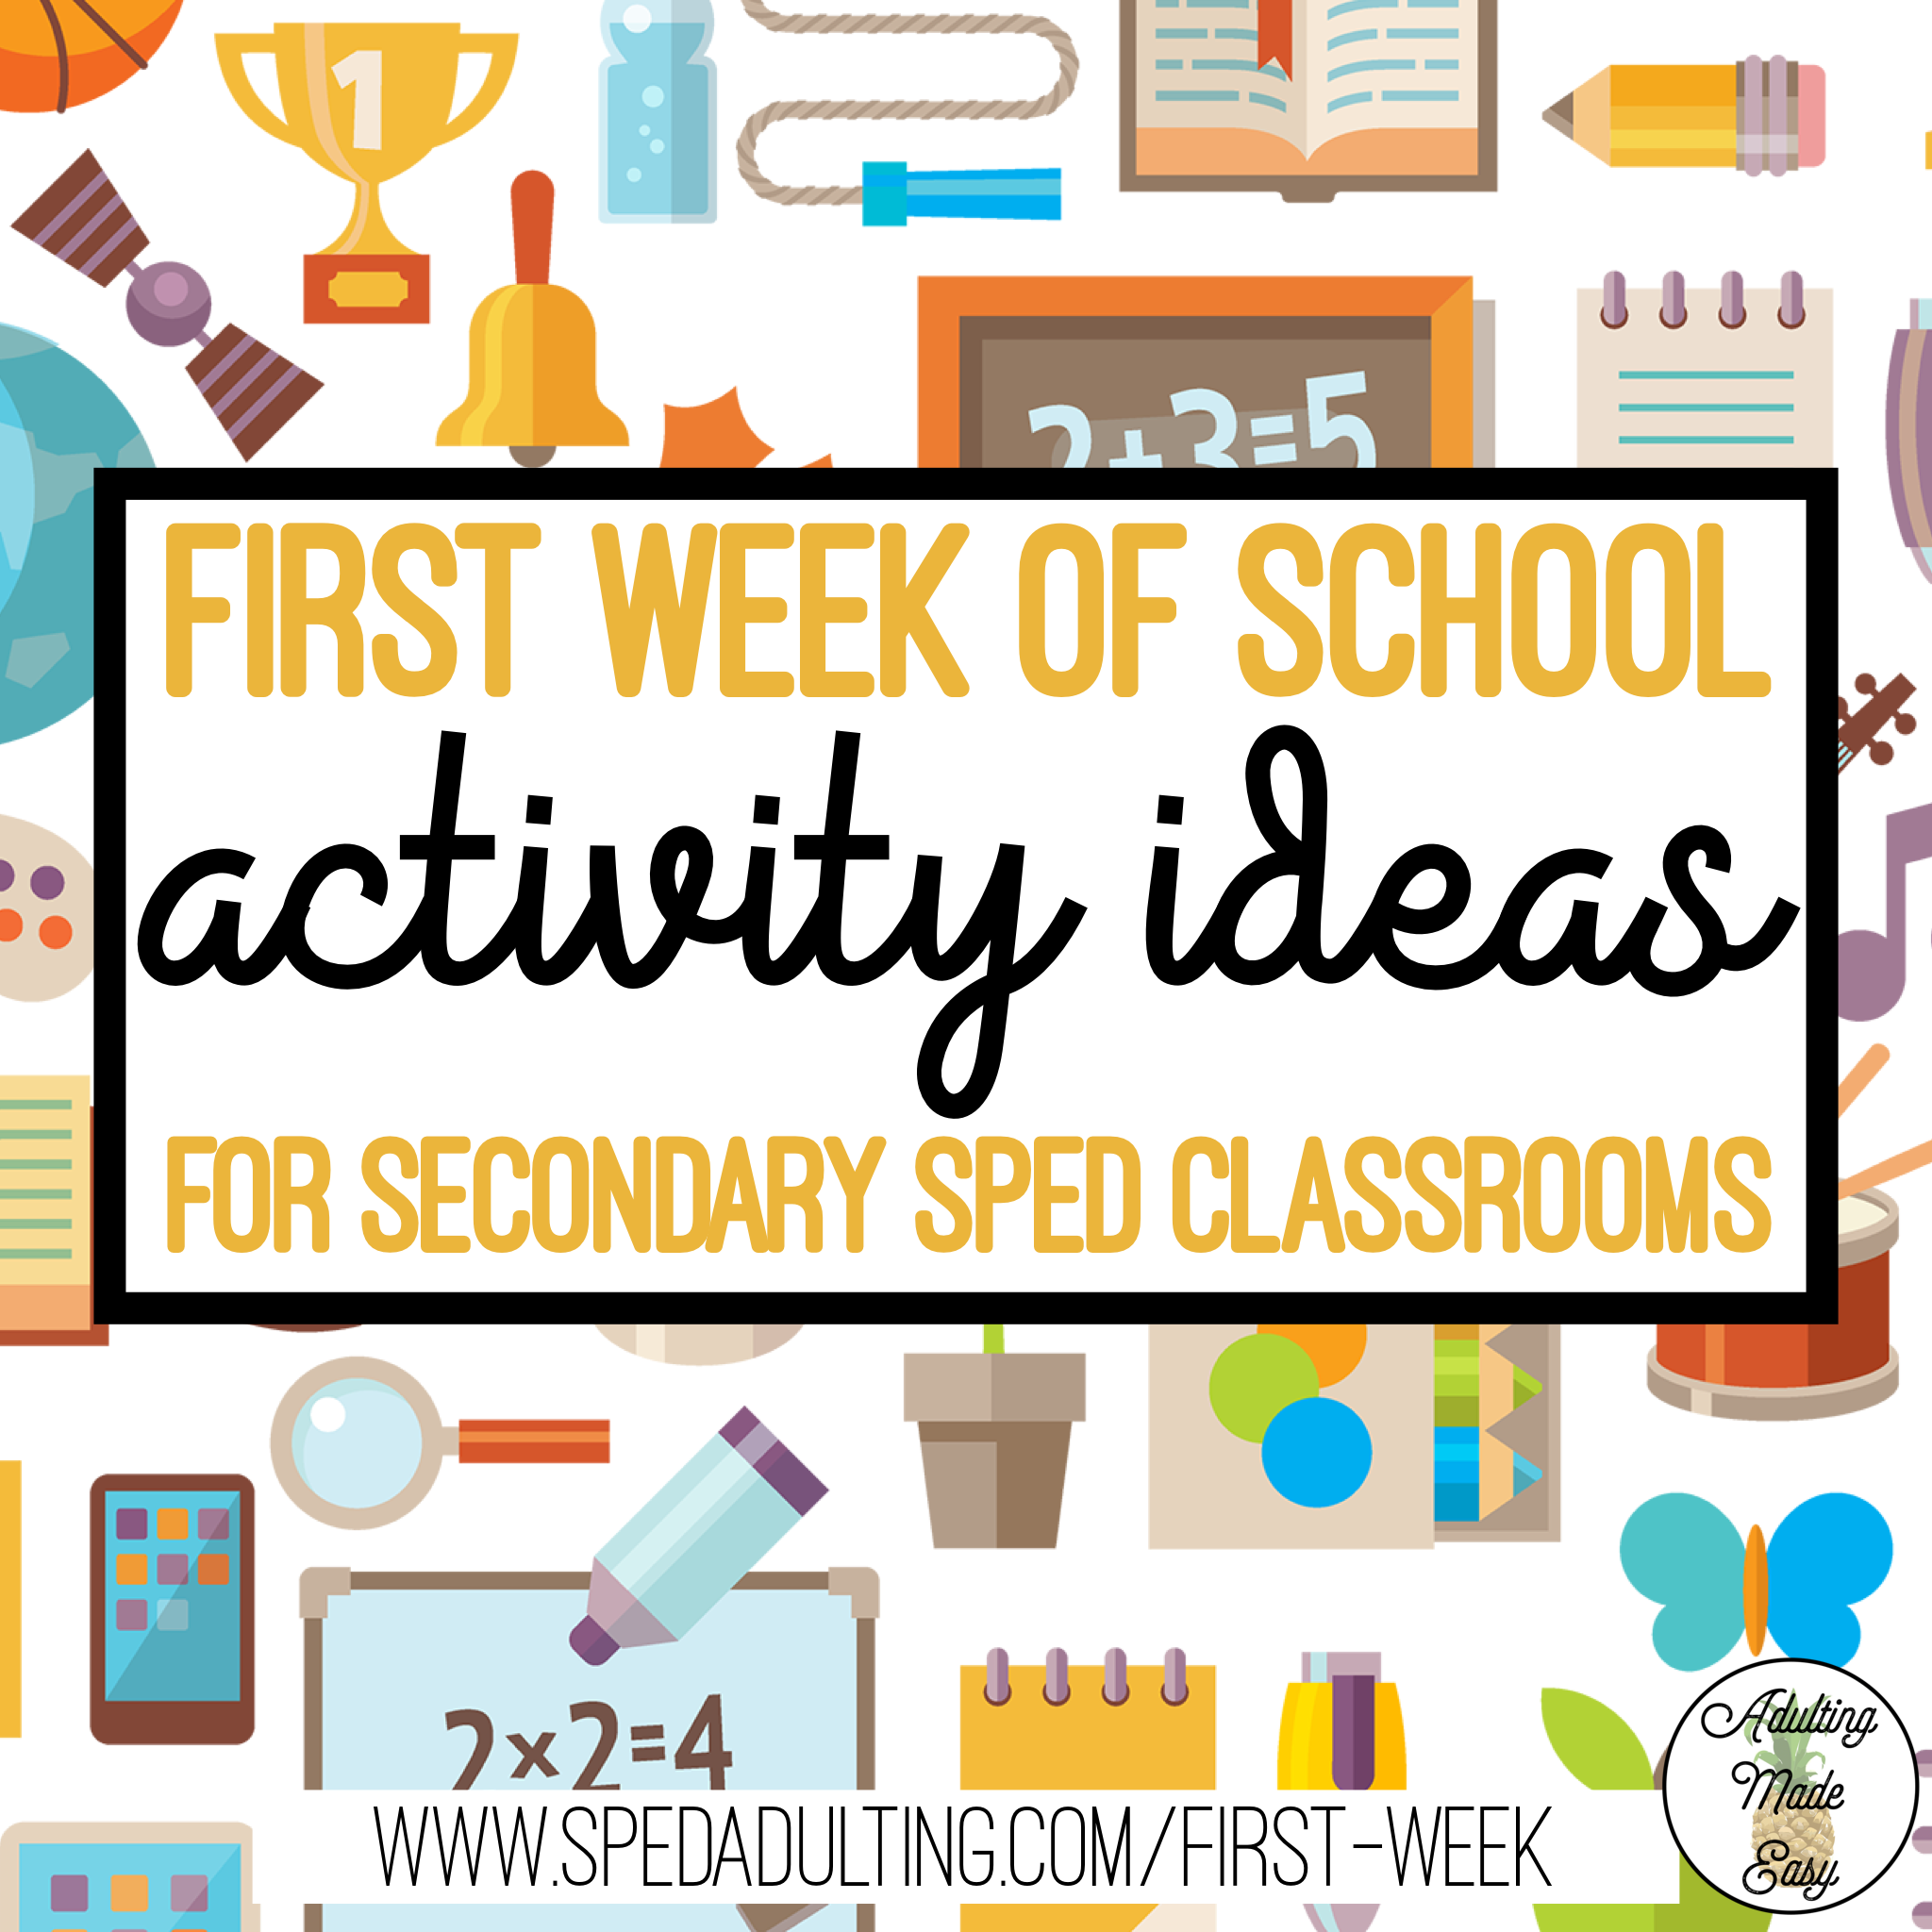 BLOG: First week of school activity ideas for secondary sped